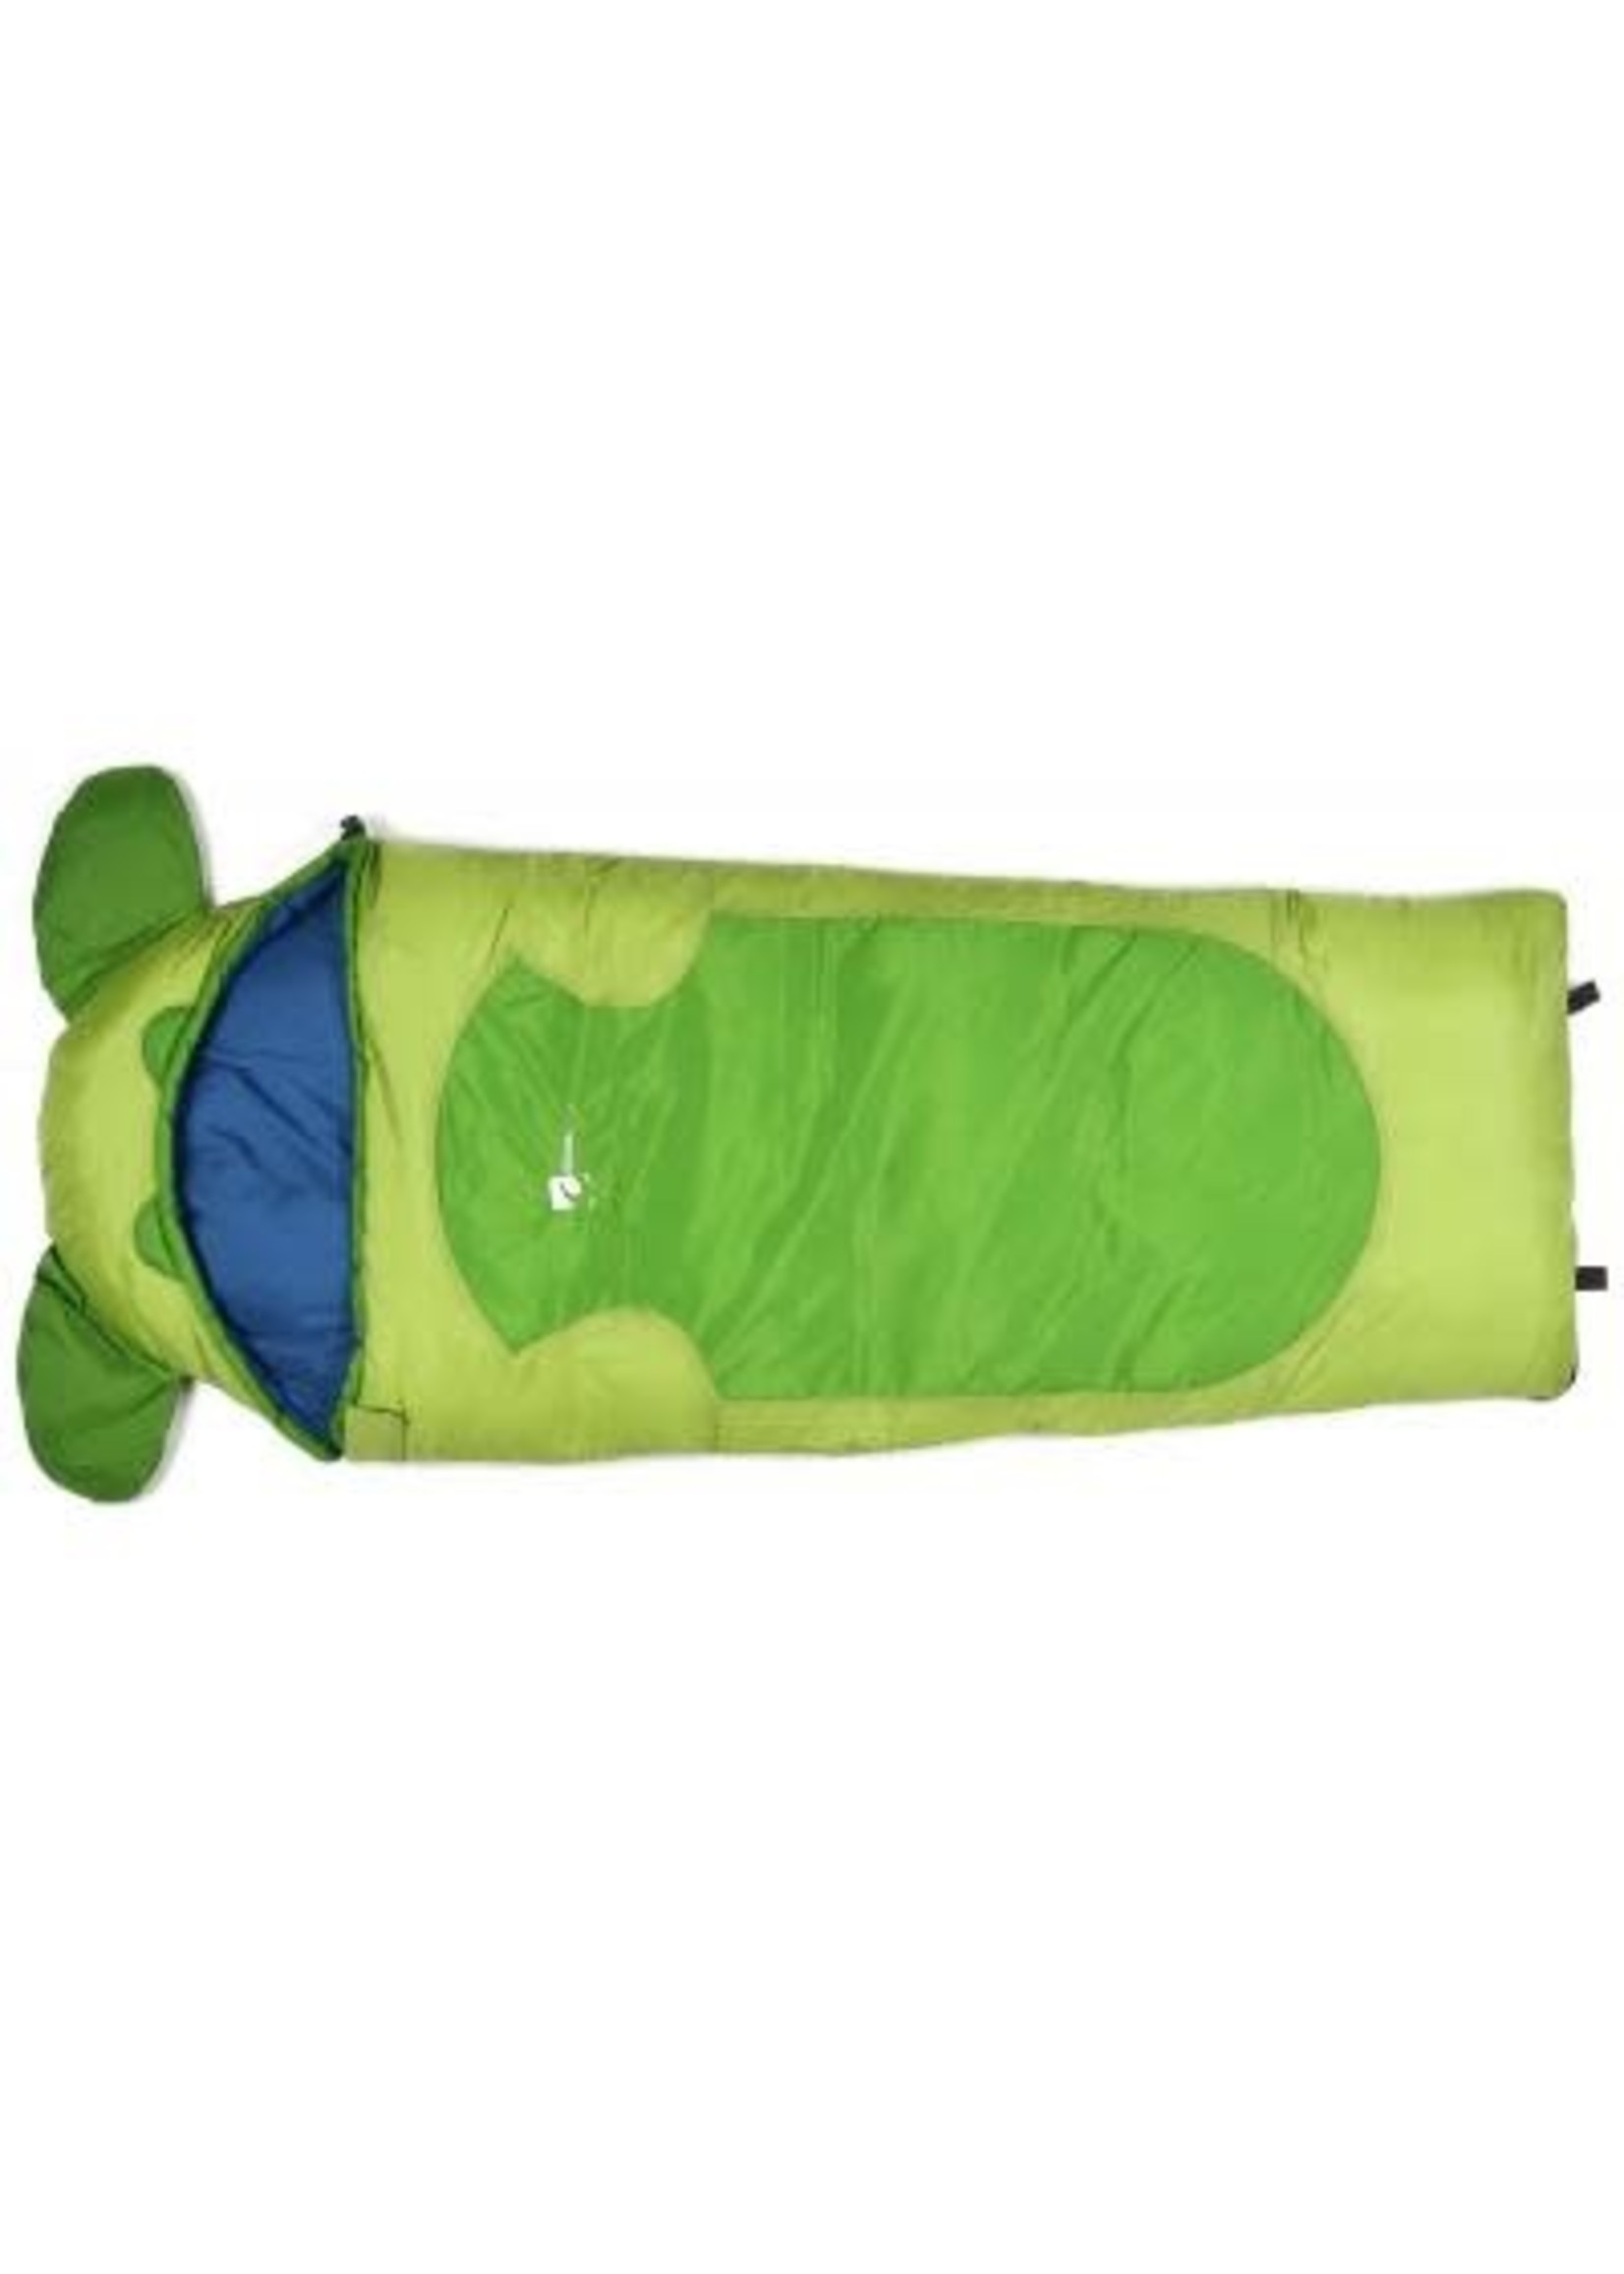 Chinook Chinook Cubs Youth Sleeping Bag  0° C / .97 KG